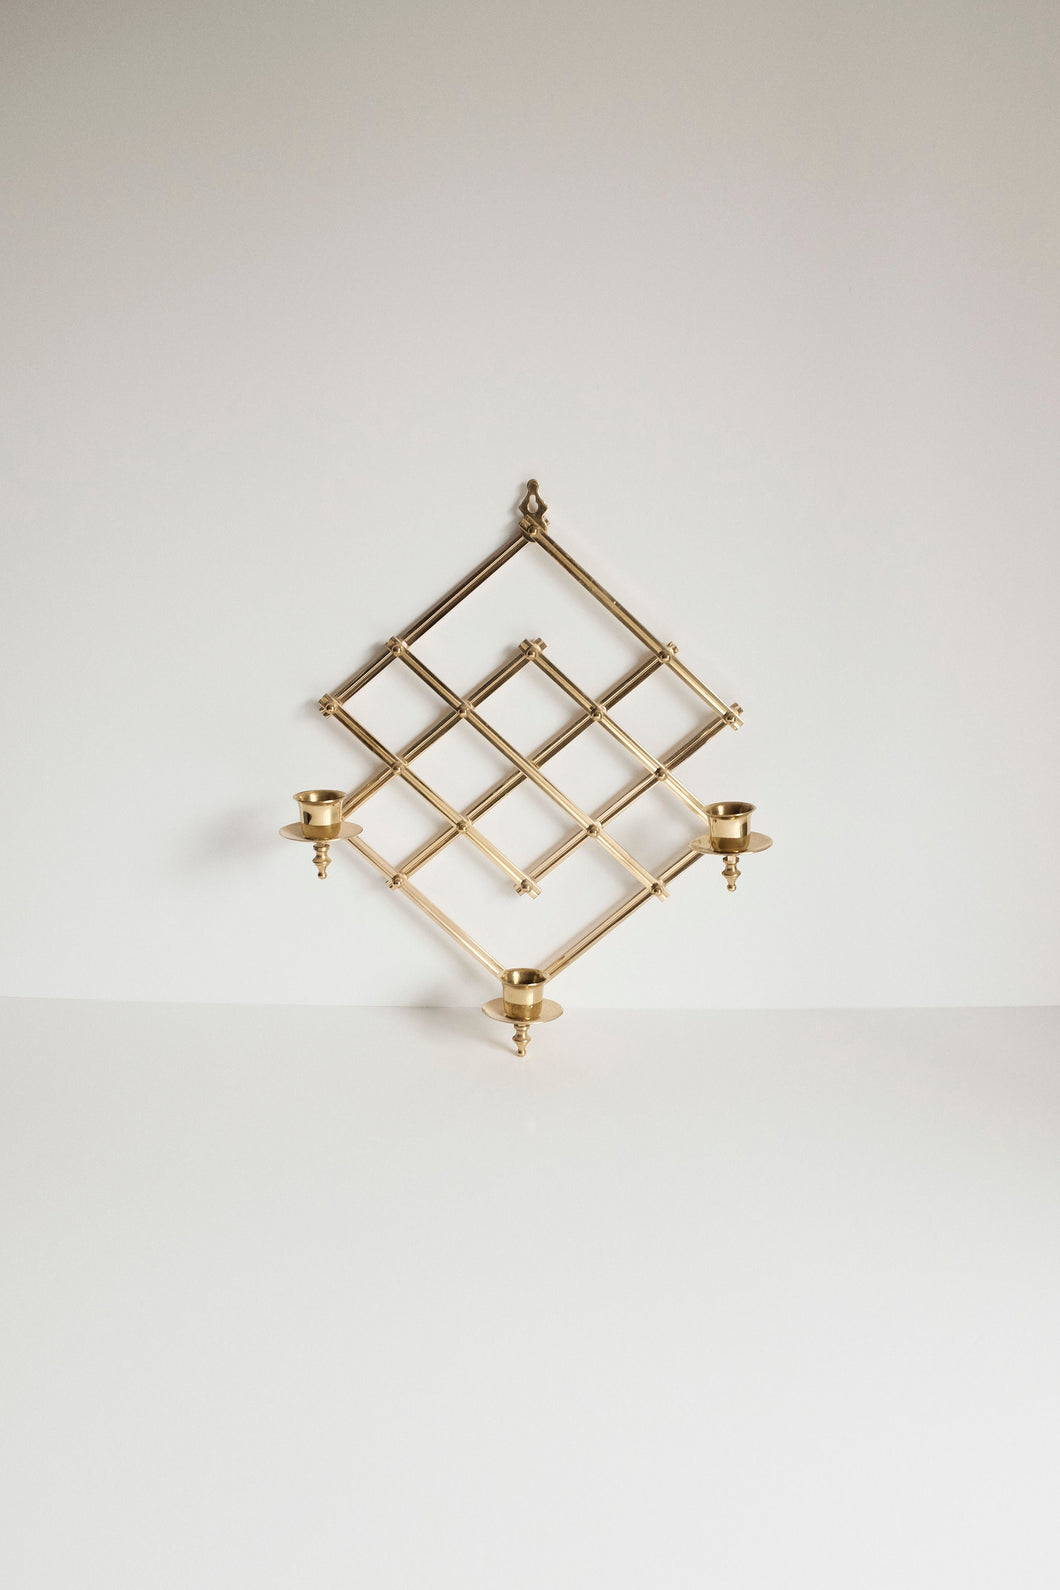 Brass Sconce Candle Holder